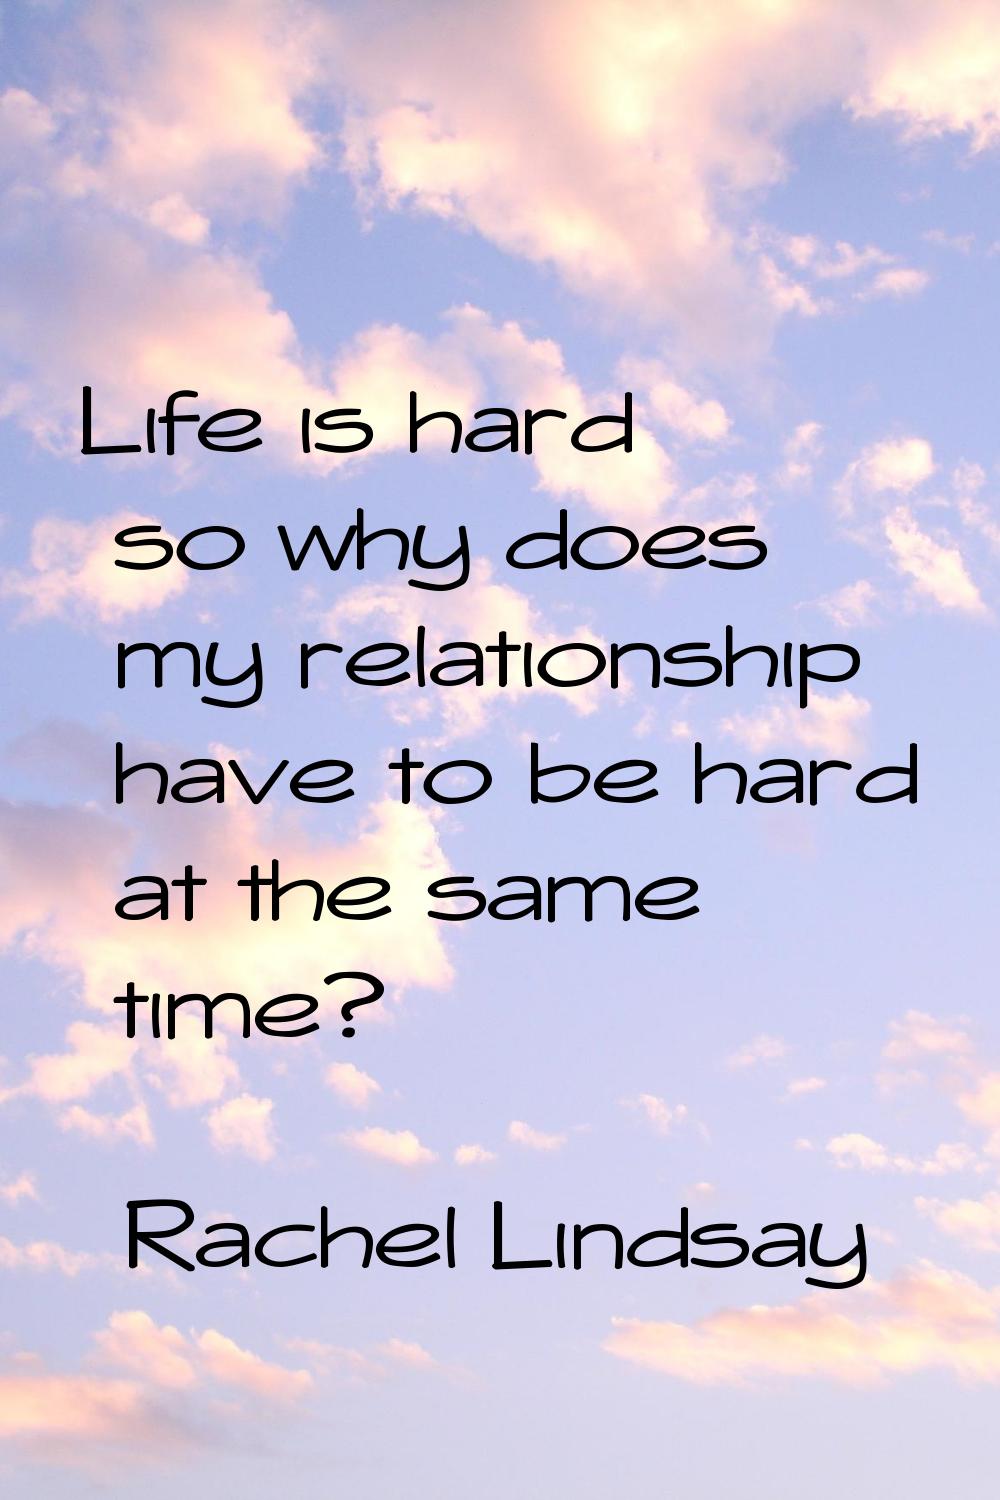 Life is hard so why does my relationship have to be hard at the same time?